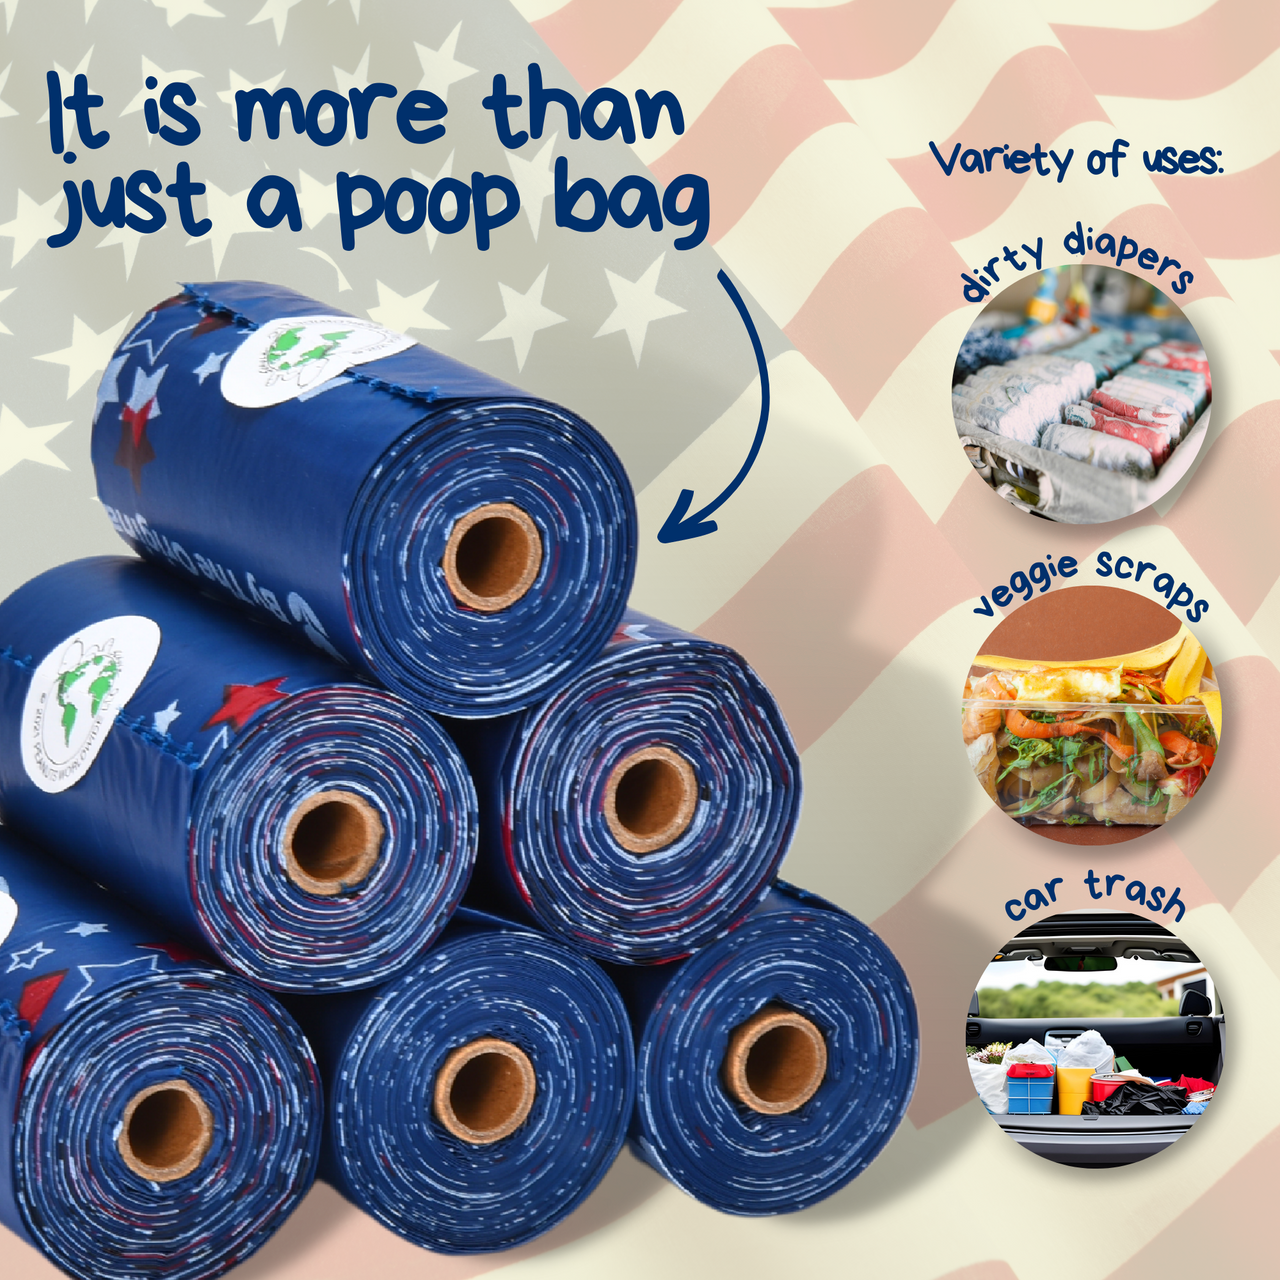 360 USDA Biobased Poop Bags, Peanuts Americana, Unscented, 9X13 inches 